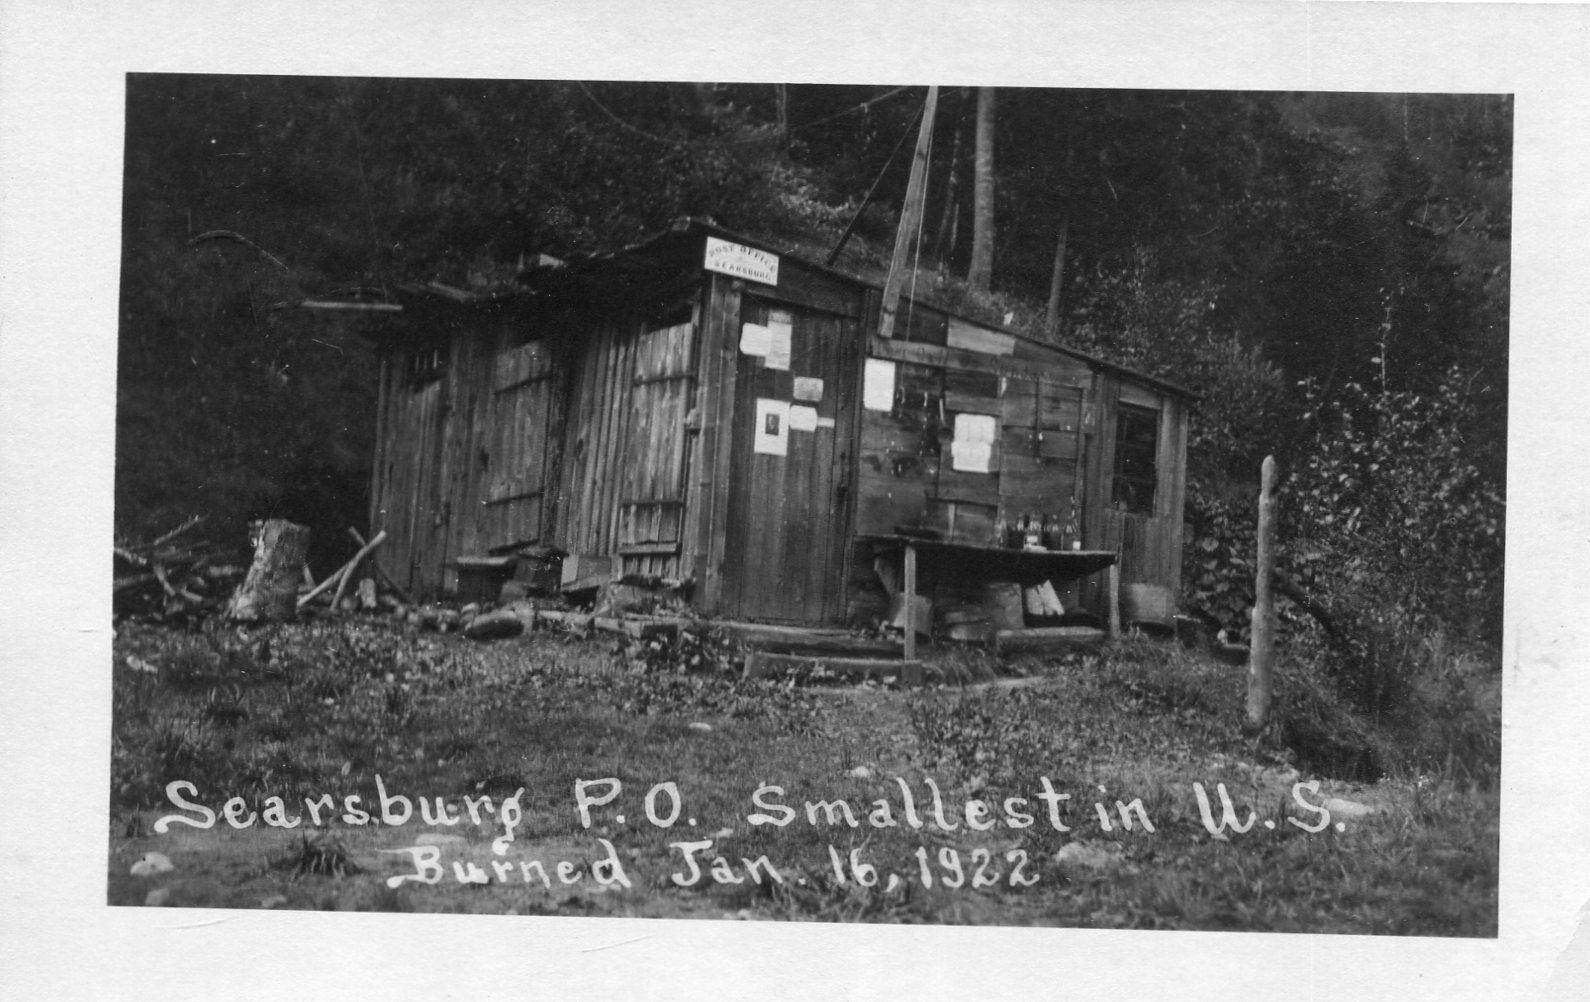 Map usa photo card searsburg smallest in u. s. burned jan 16 1922